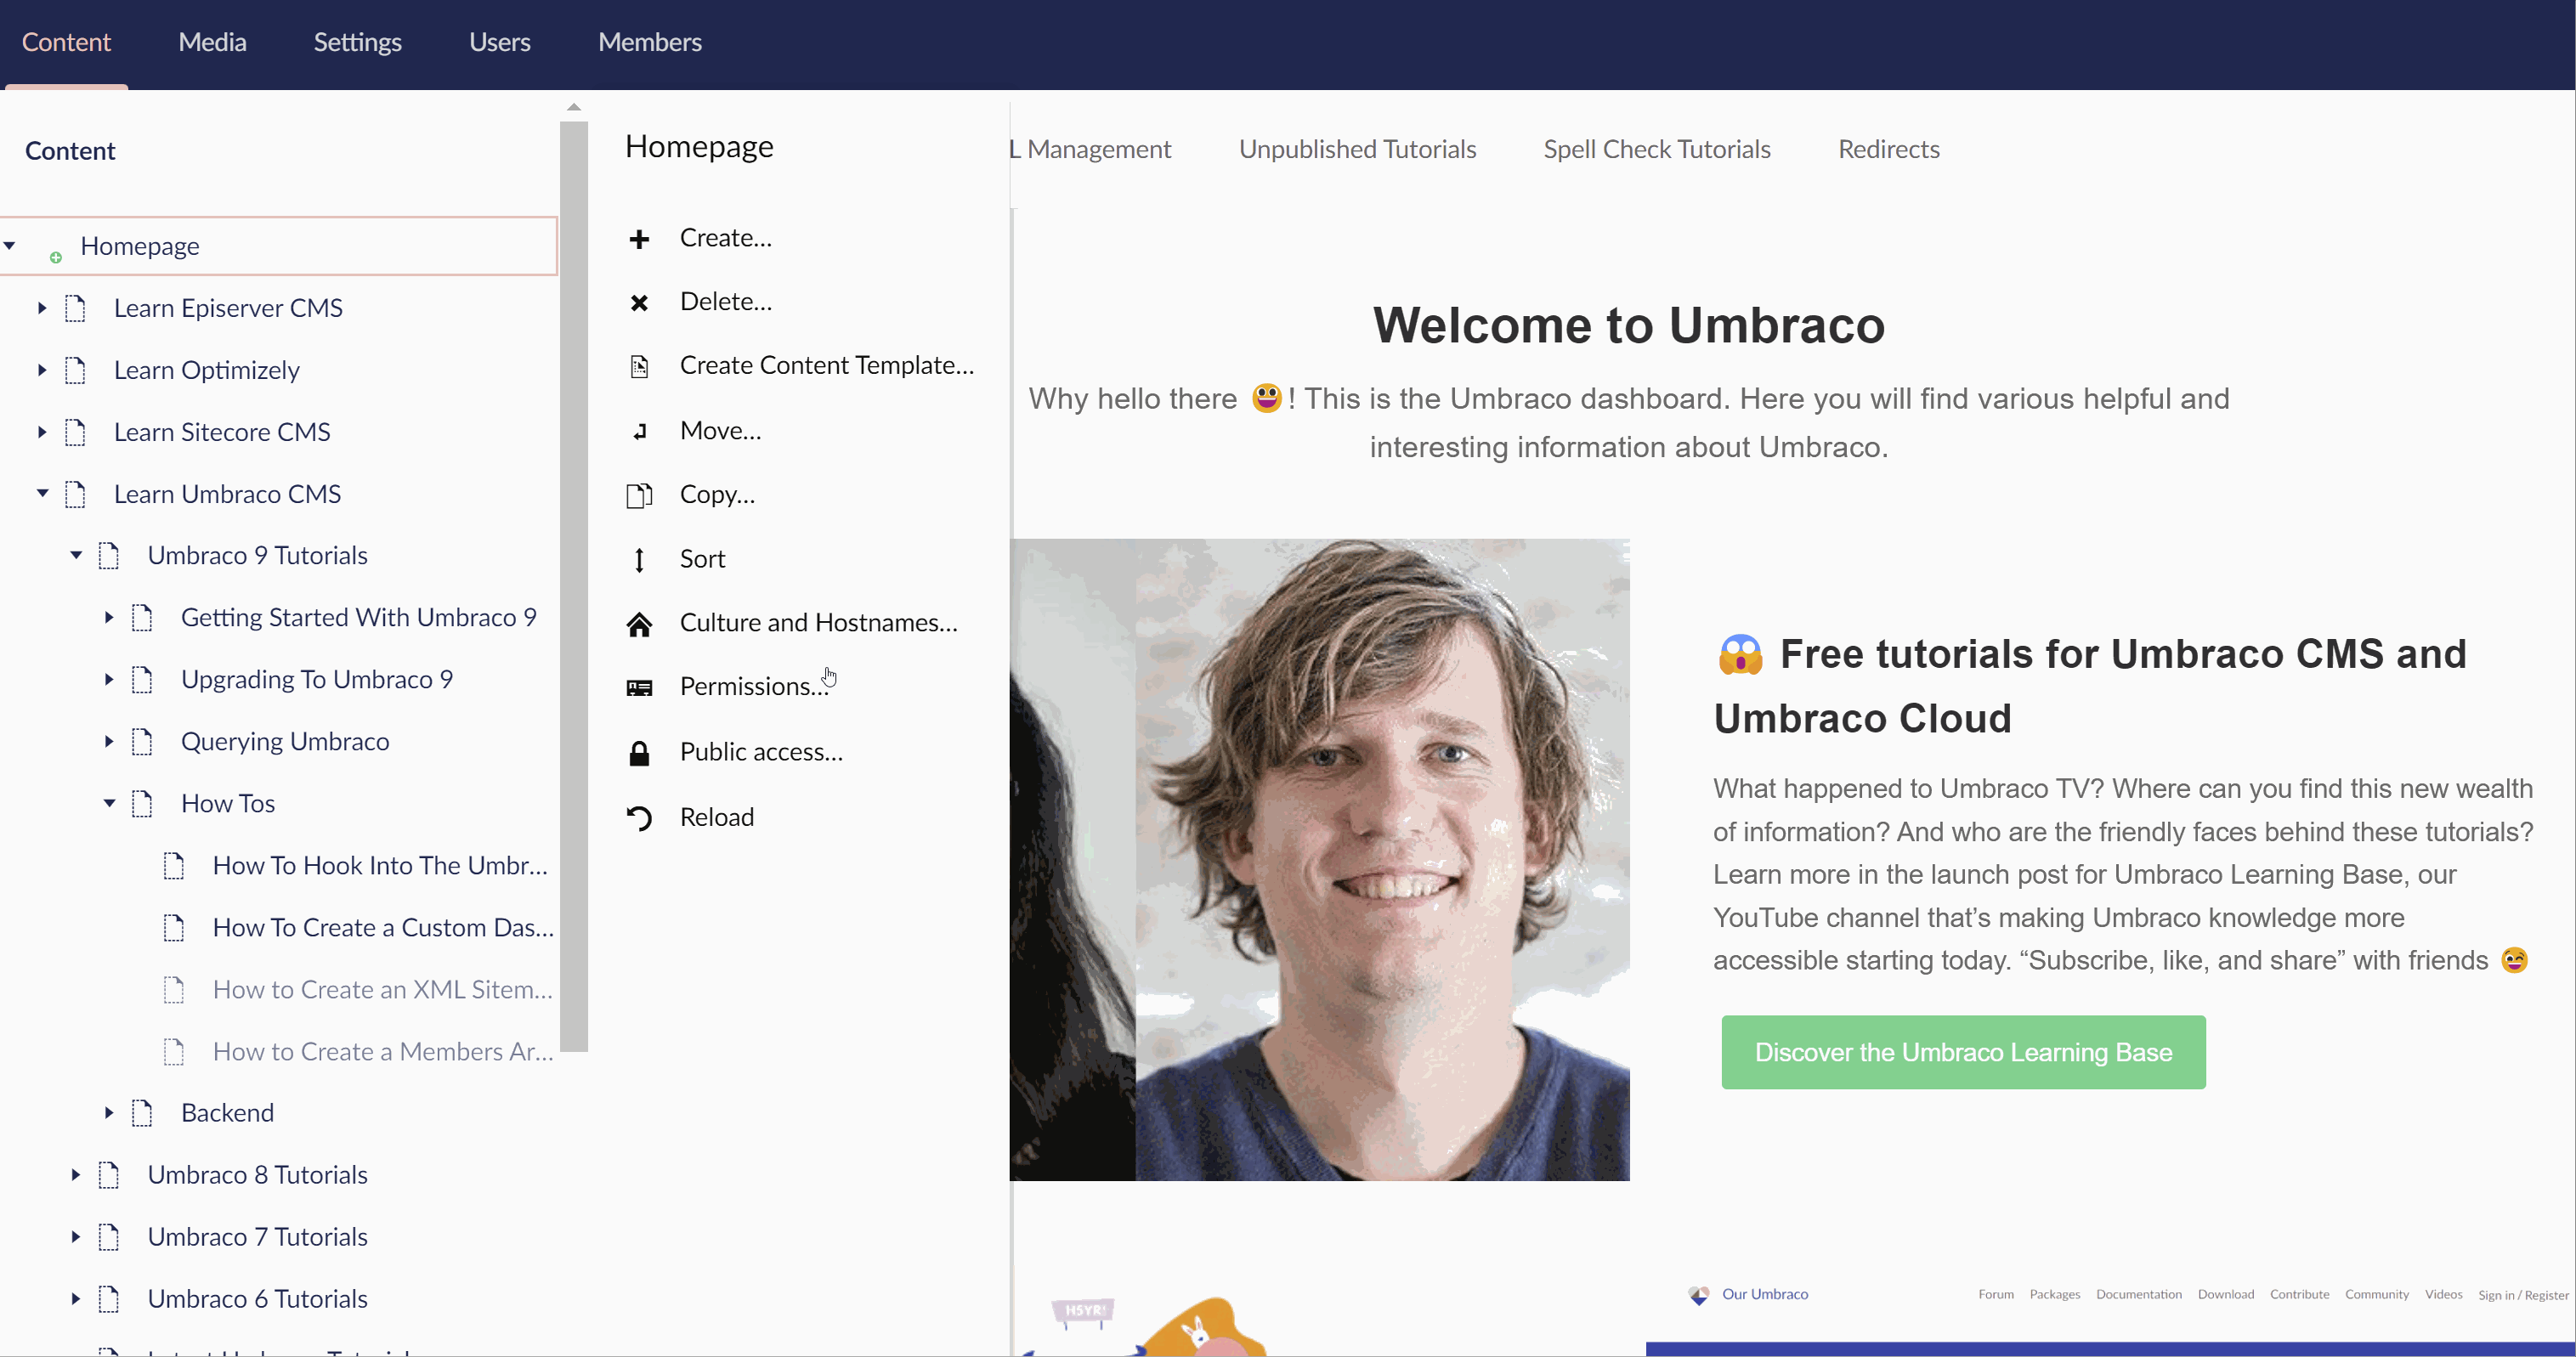 How to Create a Members Area Within Umbraco V9 3